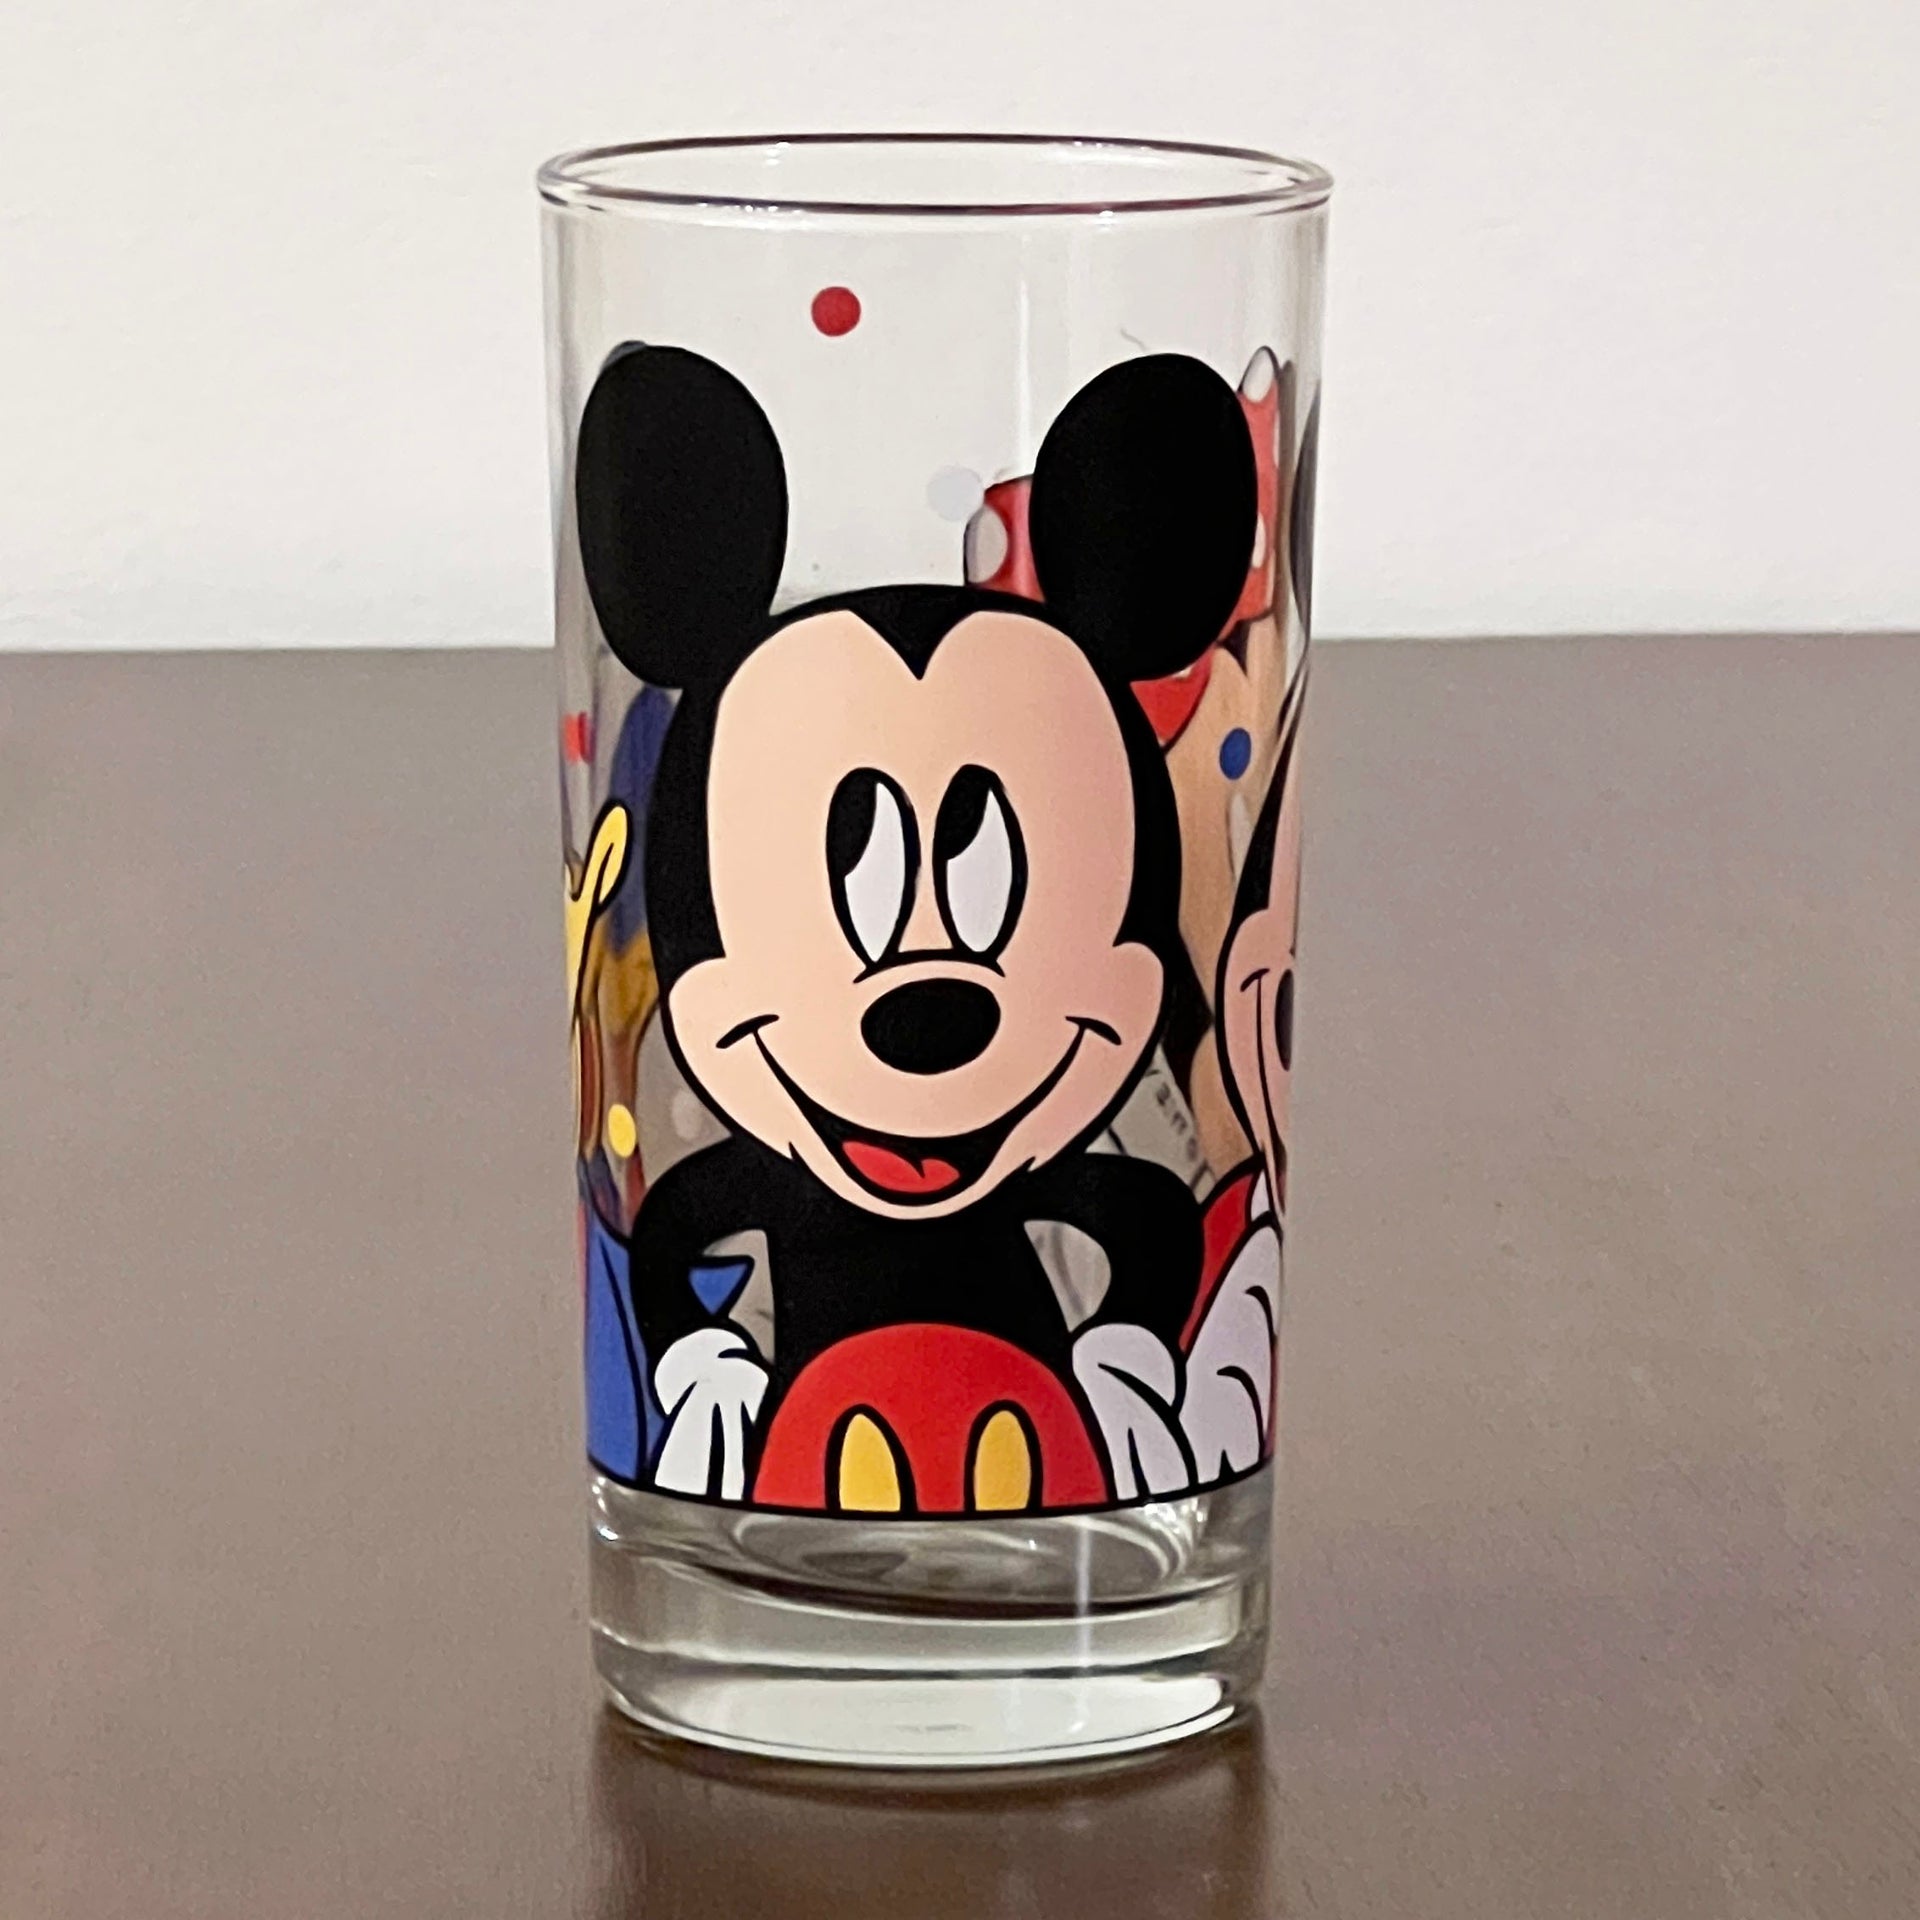 Disney Mickey Mouse, Minnie Mouse and Donald Duck Drinking Glass